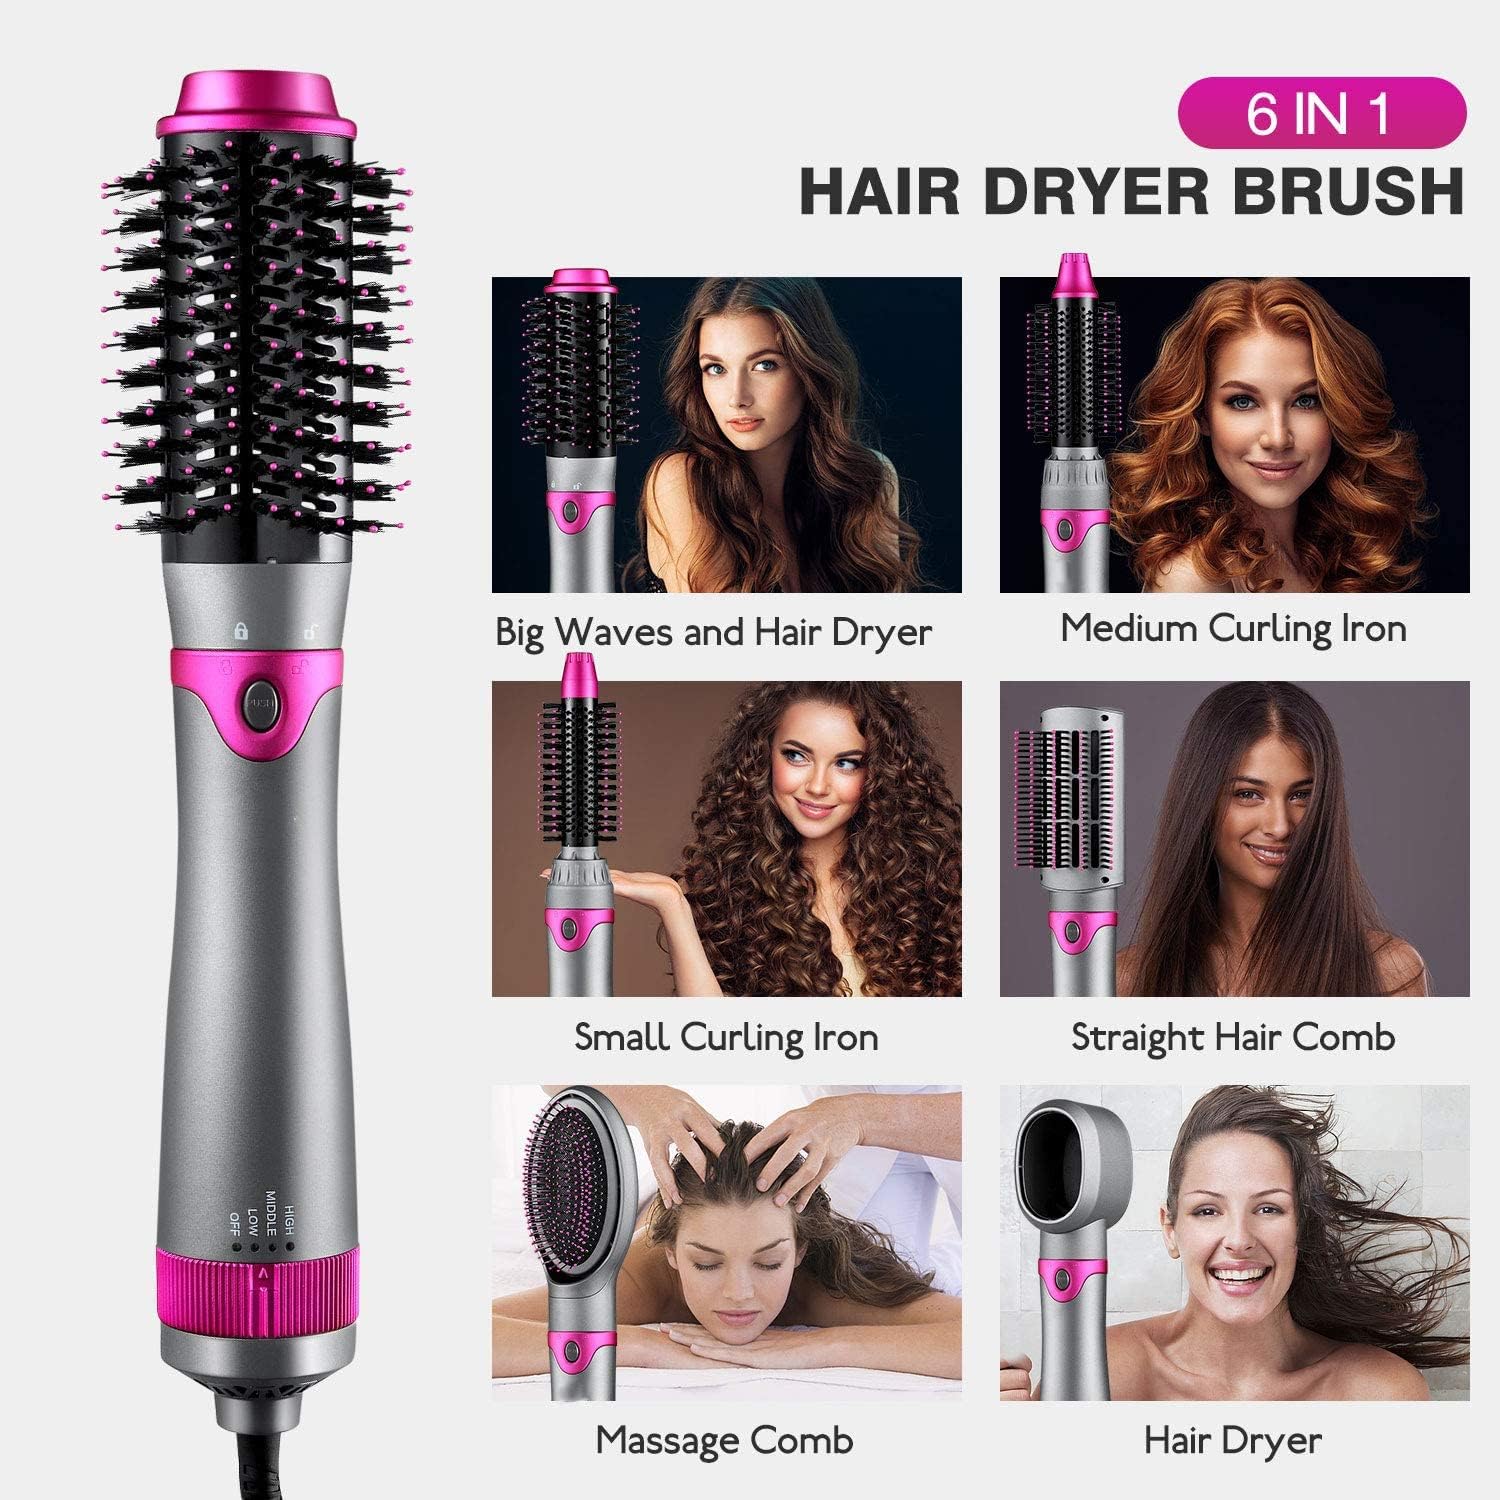 6 in 1 Hair Dryer Brush and Volumizer, Detachable Styler, One-Step Hot Air for Straightening Curling Drying Combing Styling